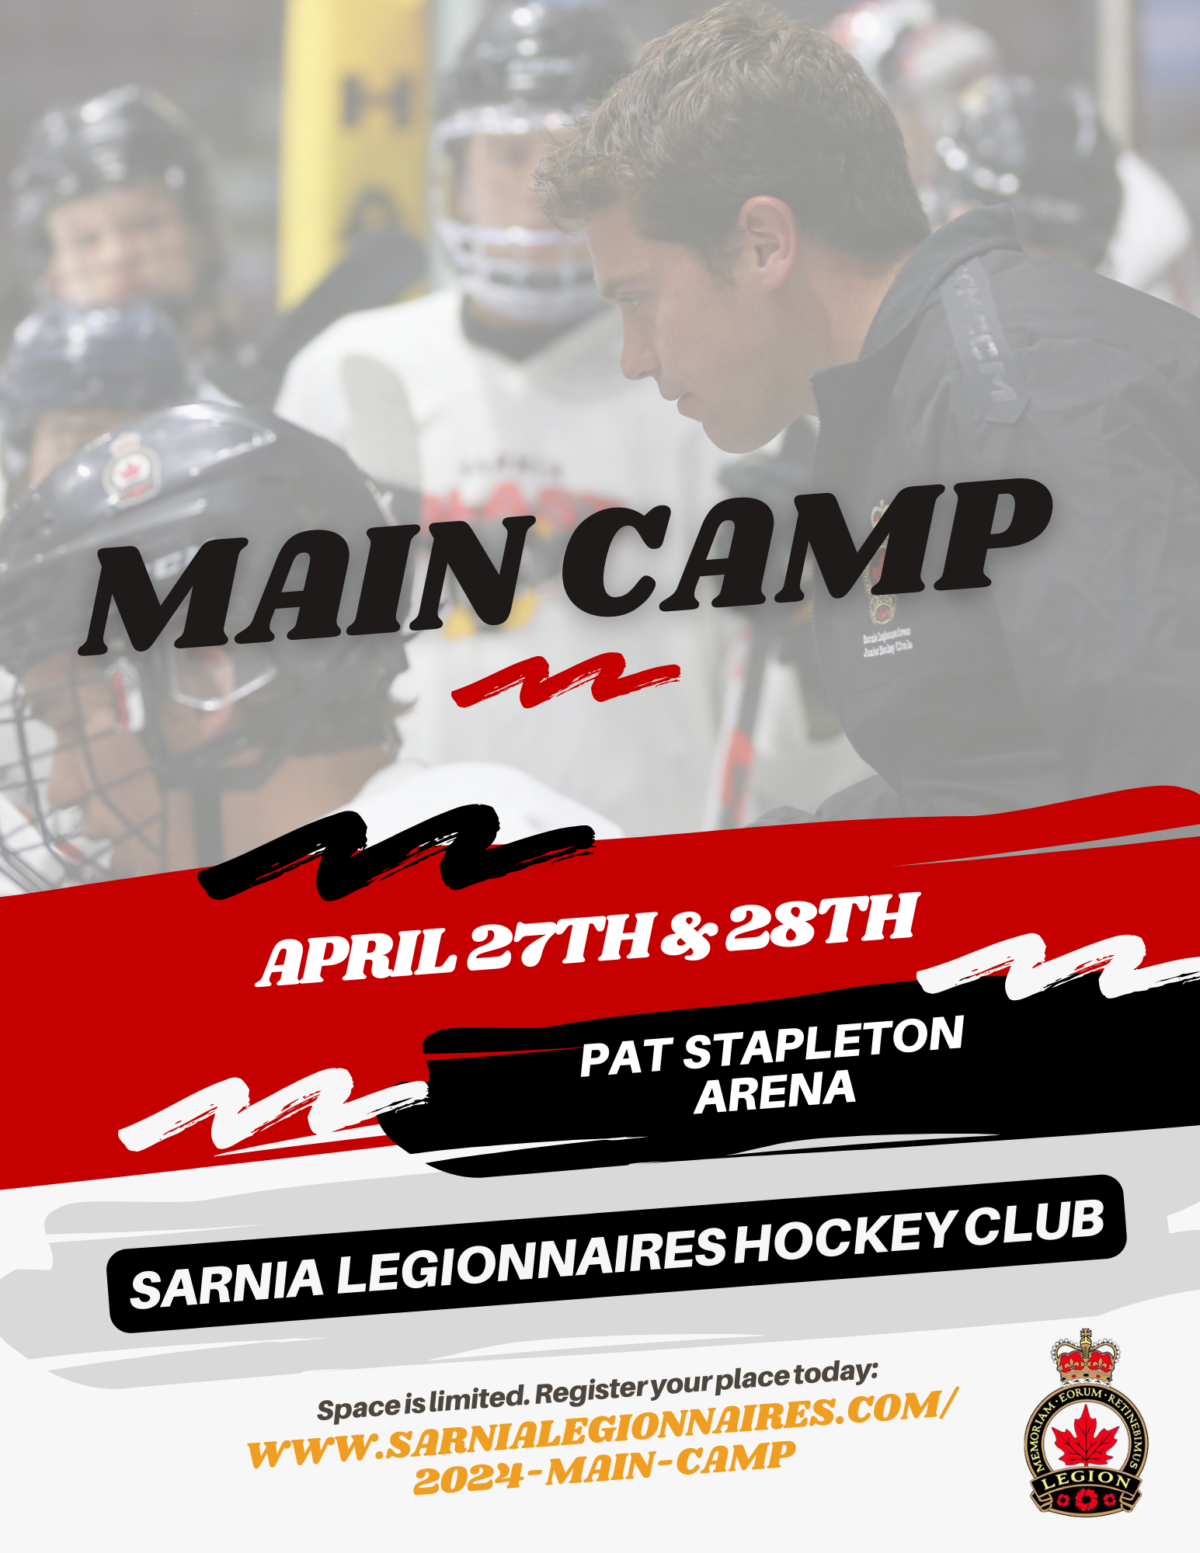 Main Camp is almost here